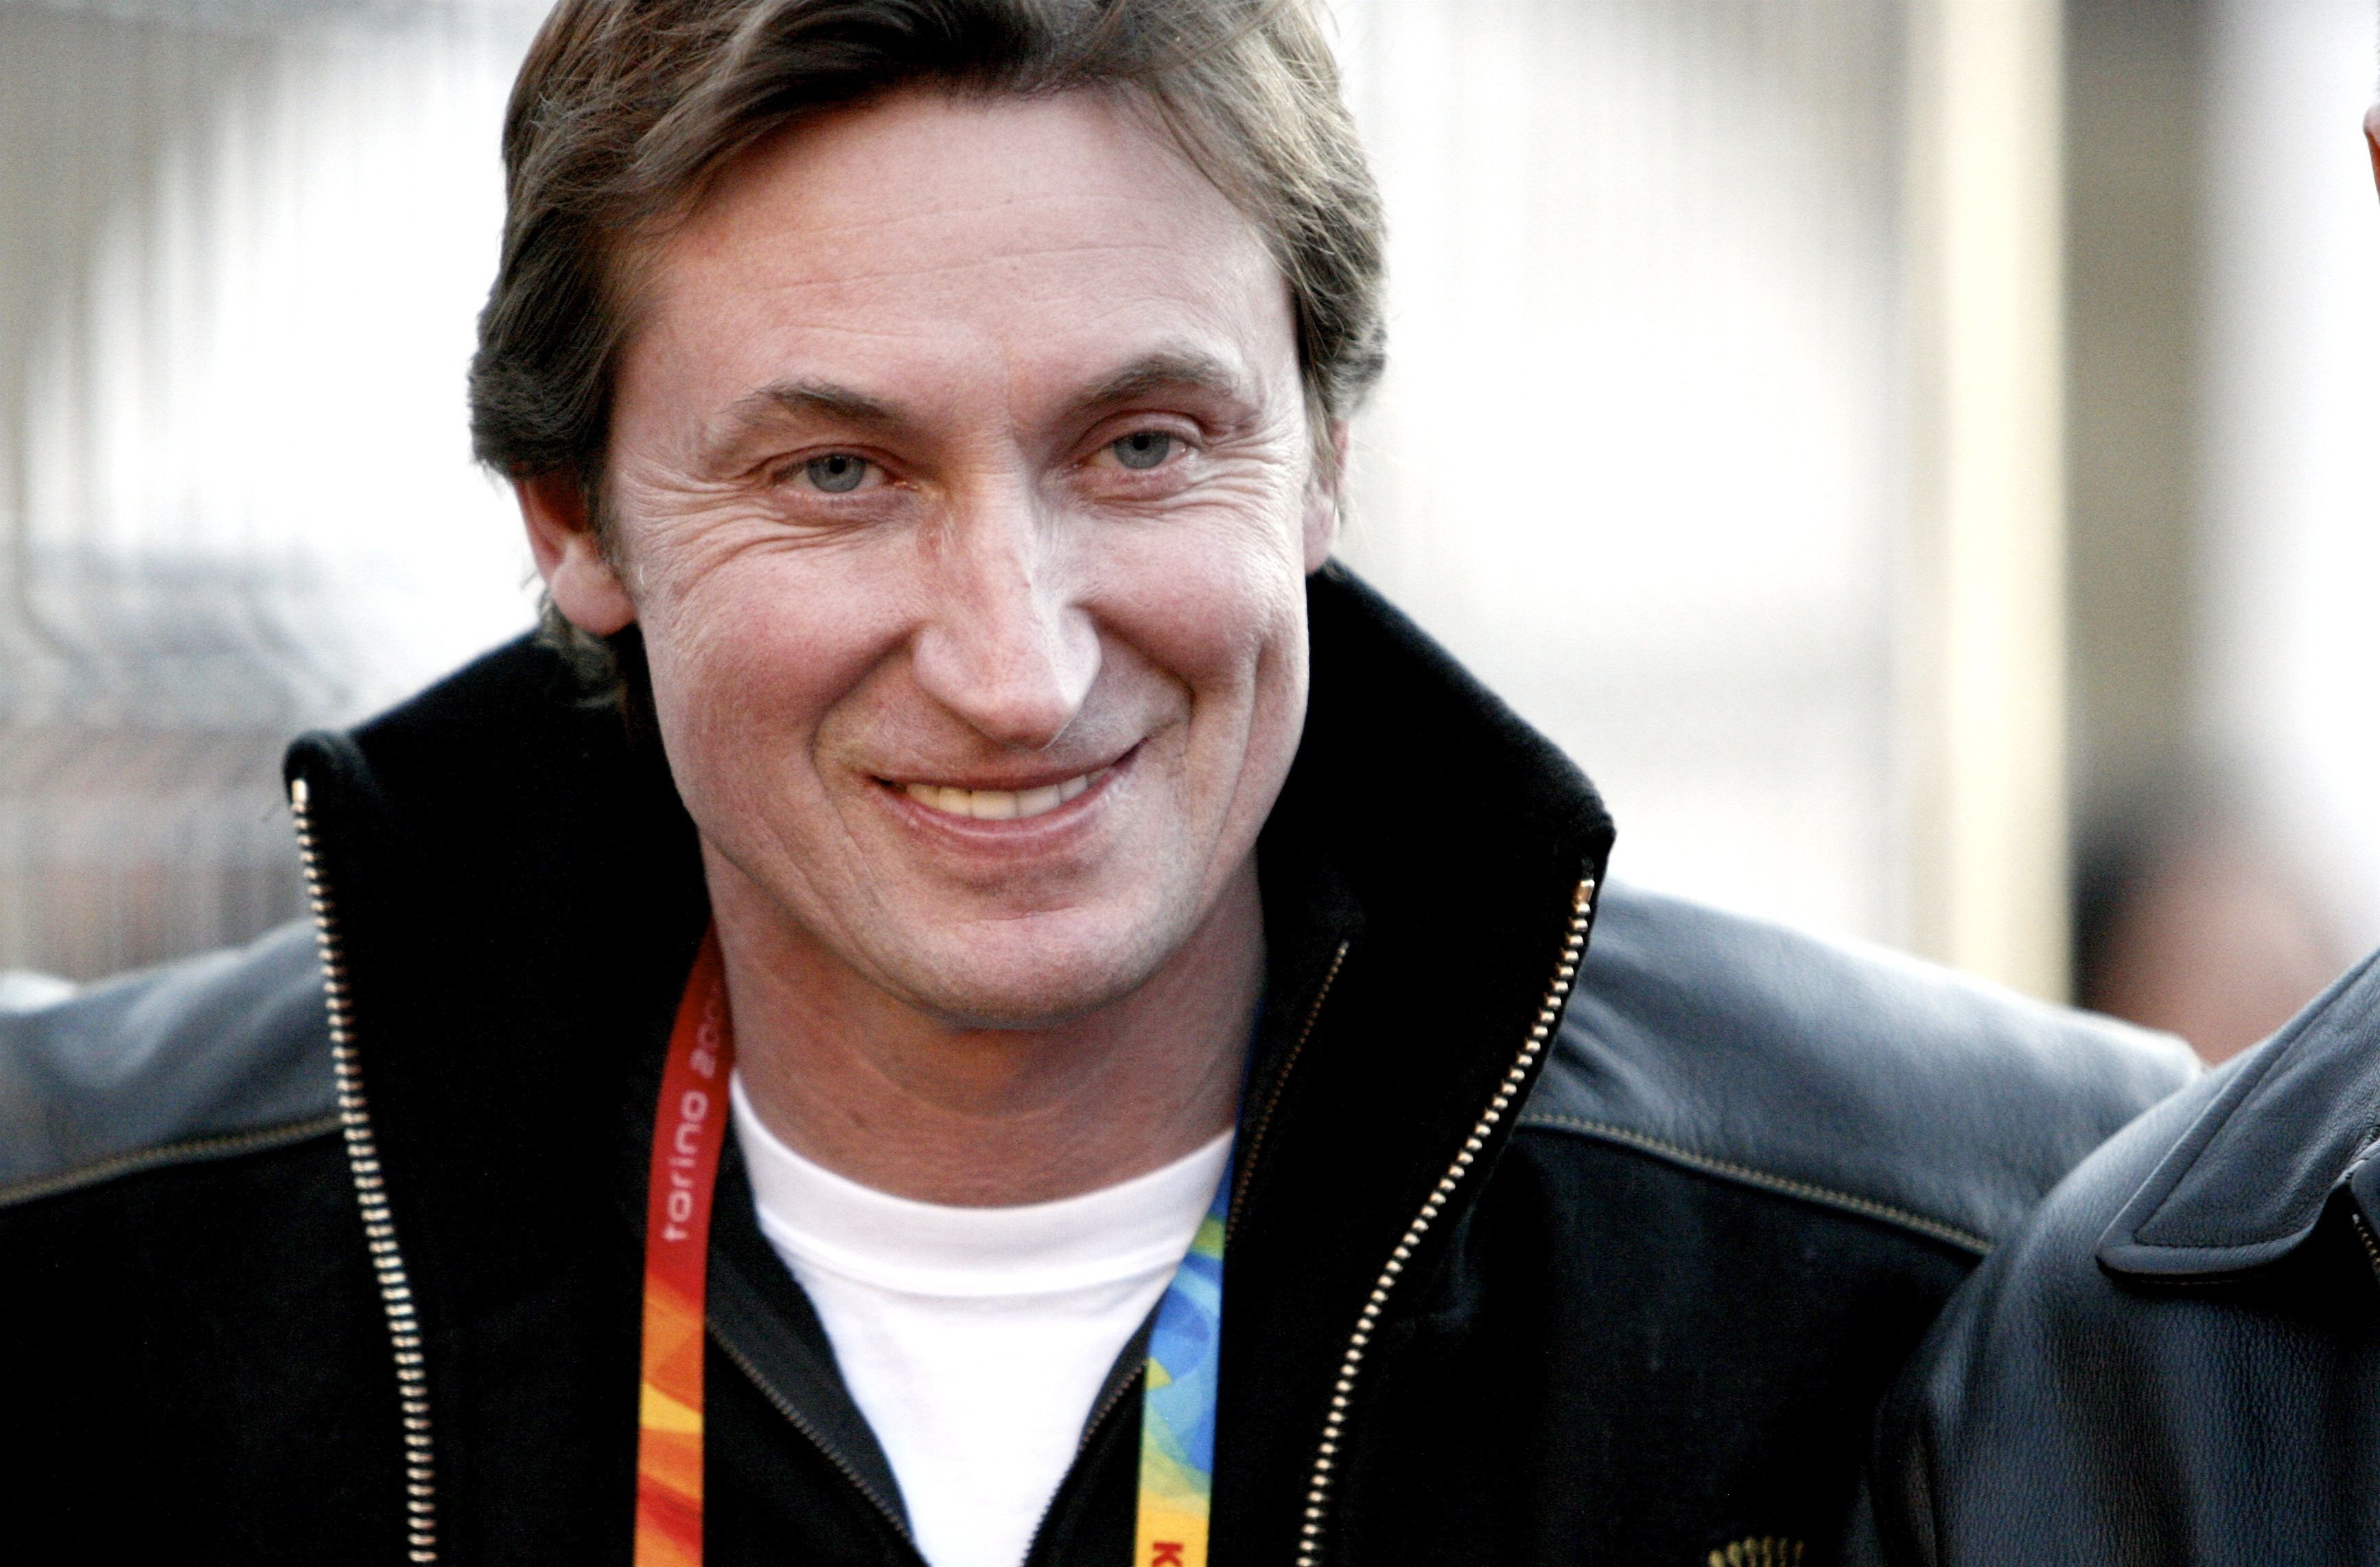 Quotes by Wayne Gretzky @ Like Success